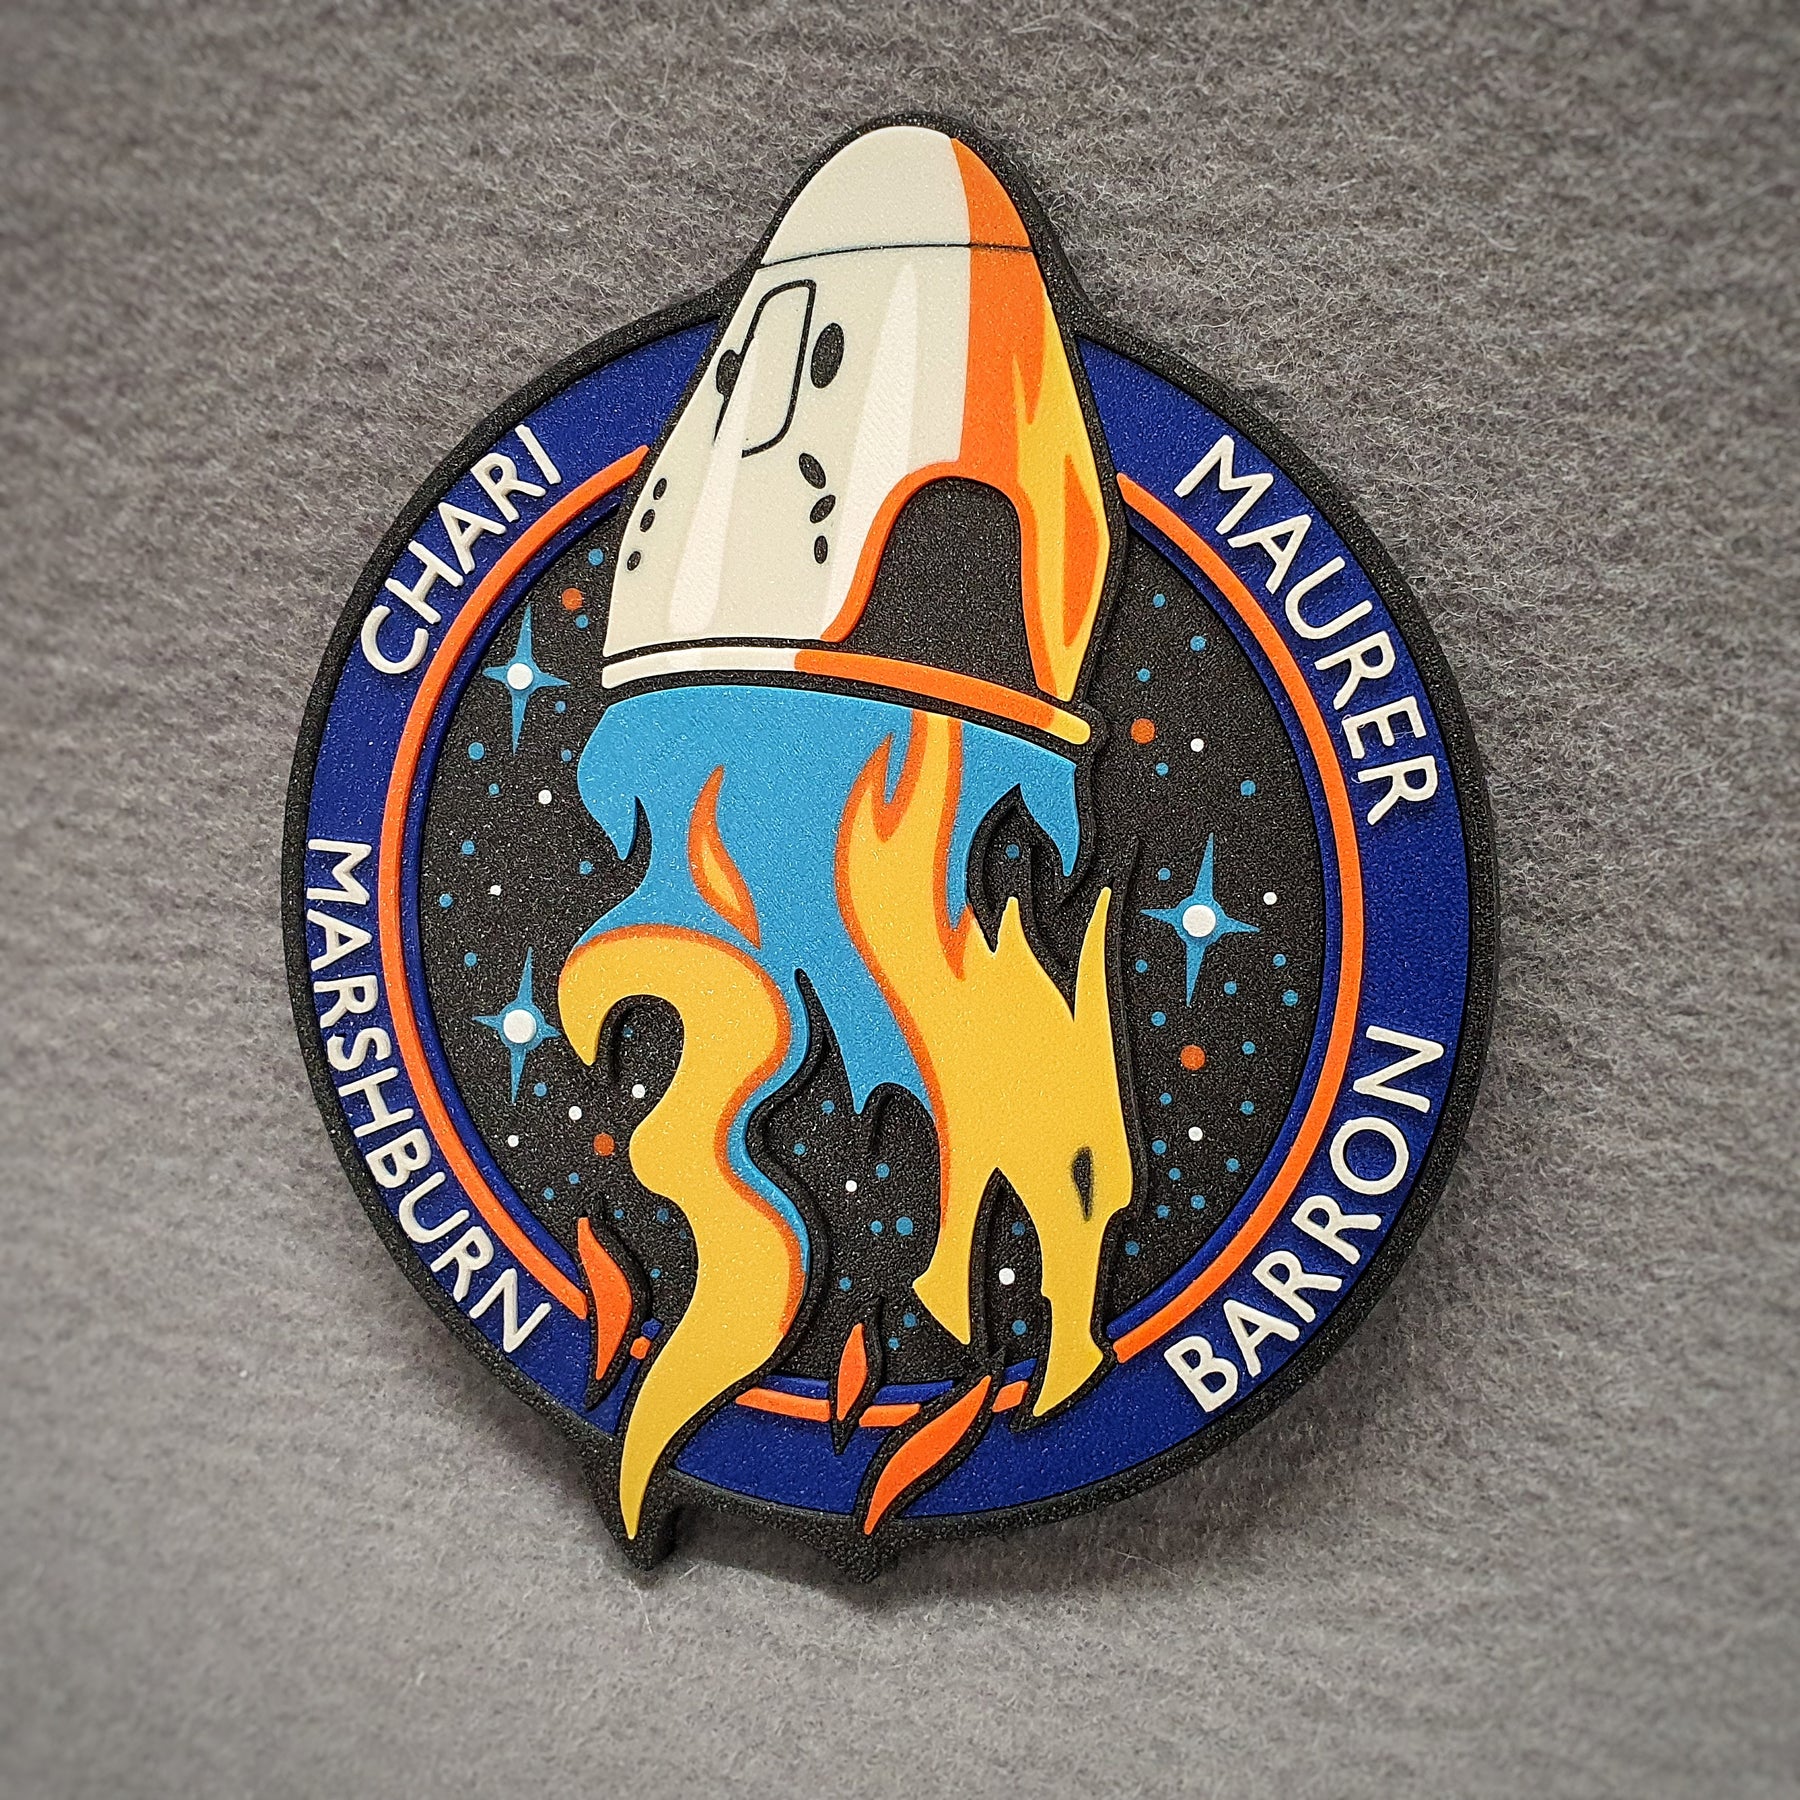 SpaceX - Crew 3 Patch